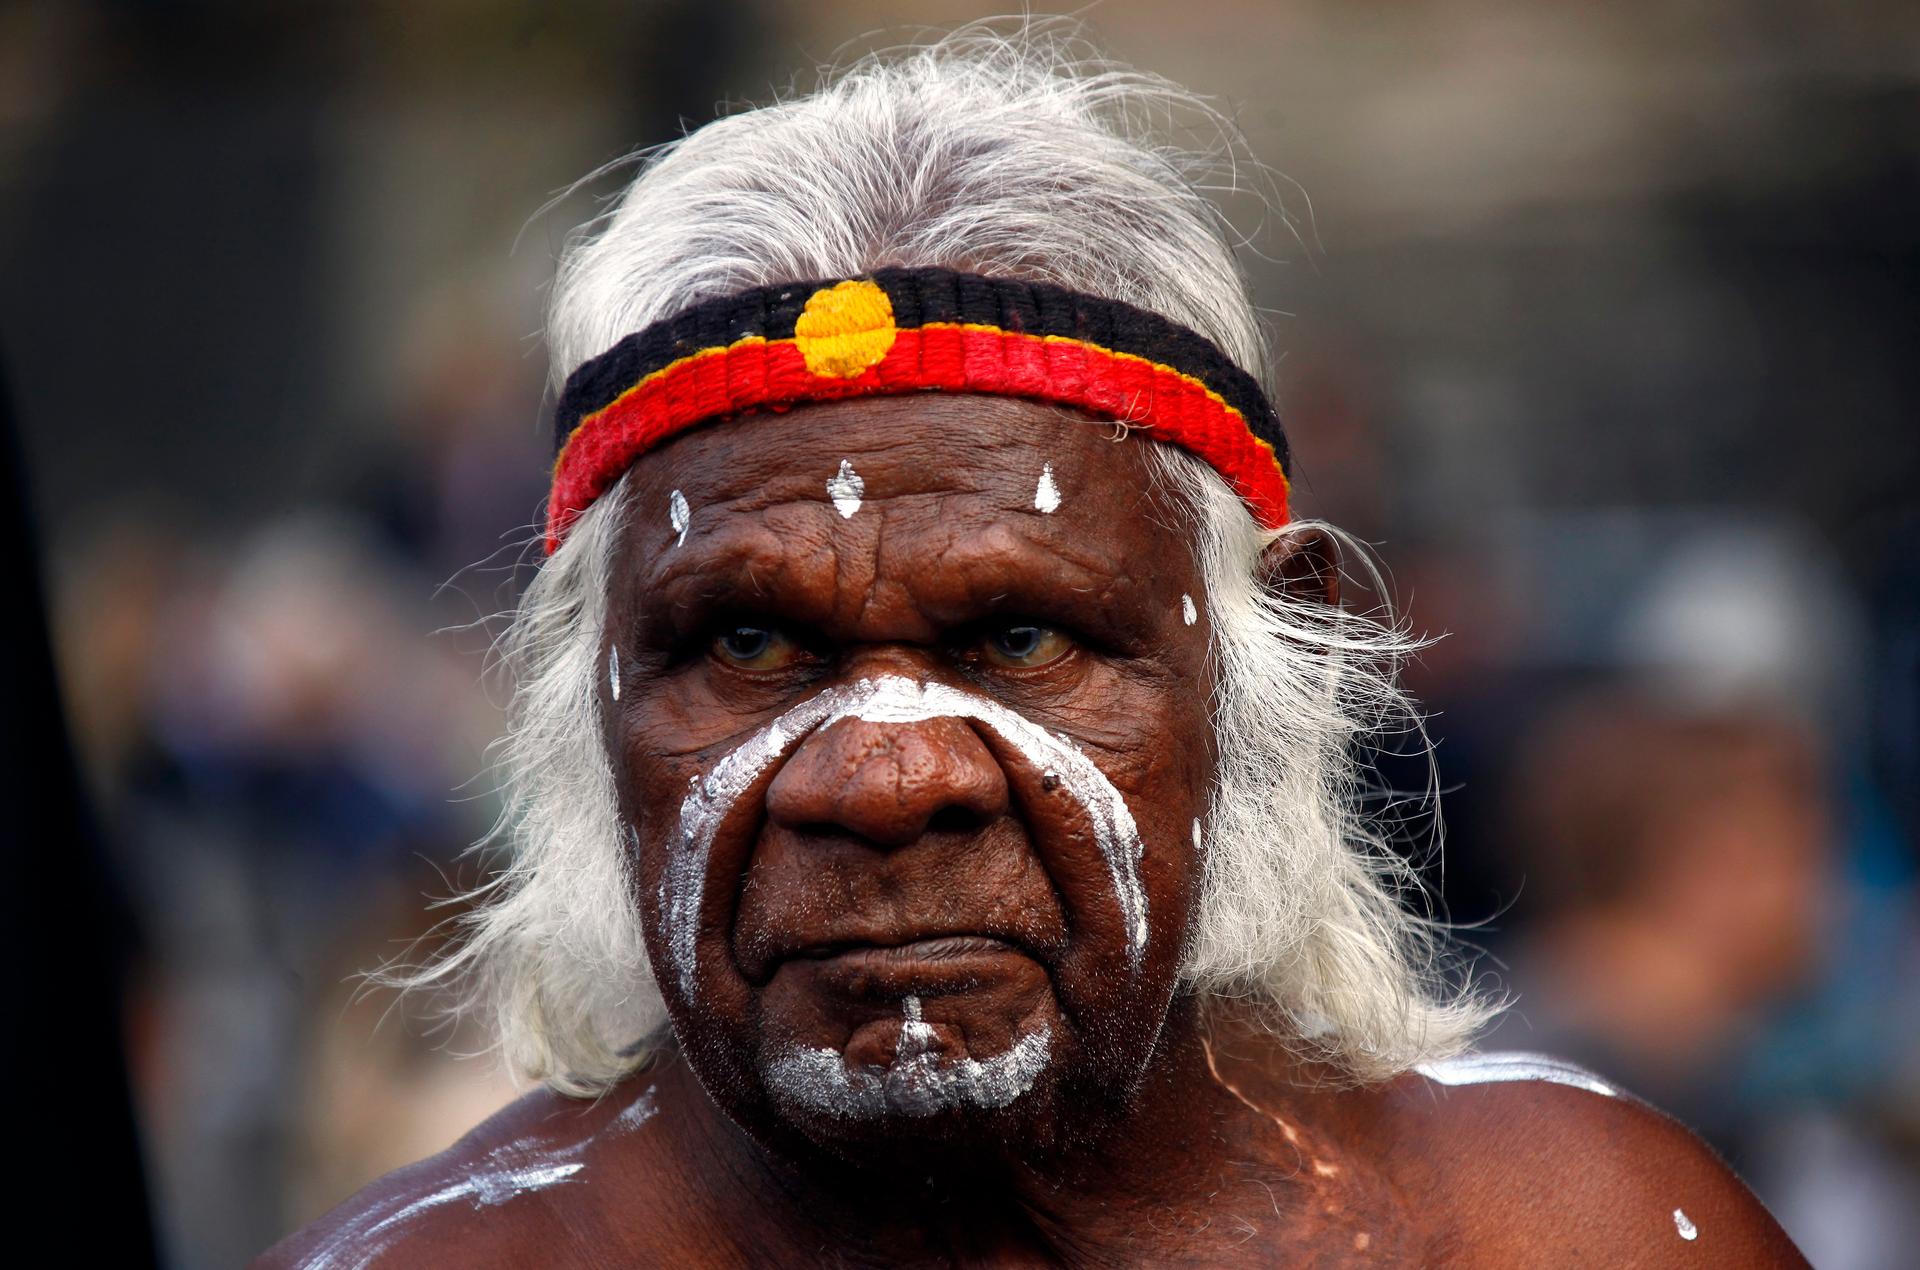 An Aboriginal performer in Sydney, Australia. Aboriginal languages in Australia are among the fastest-disappearing tongues in the world.